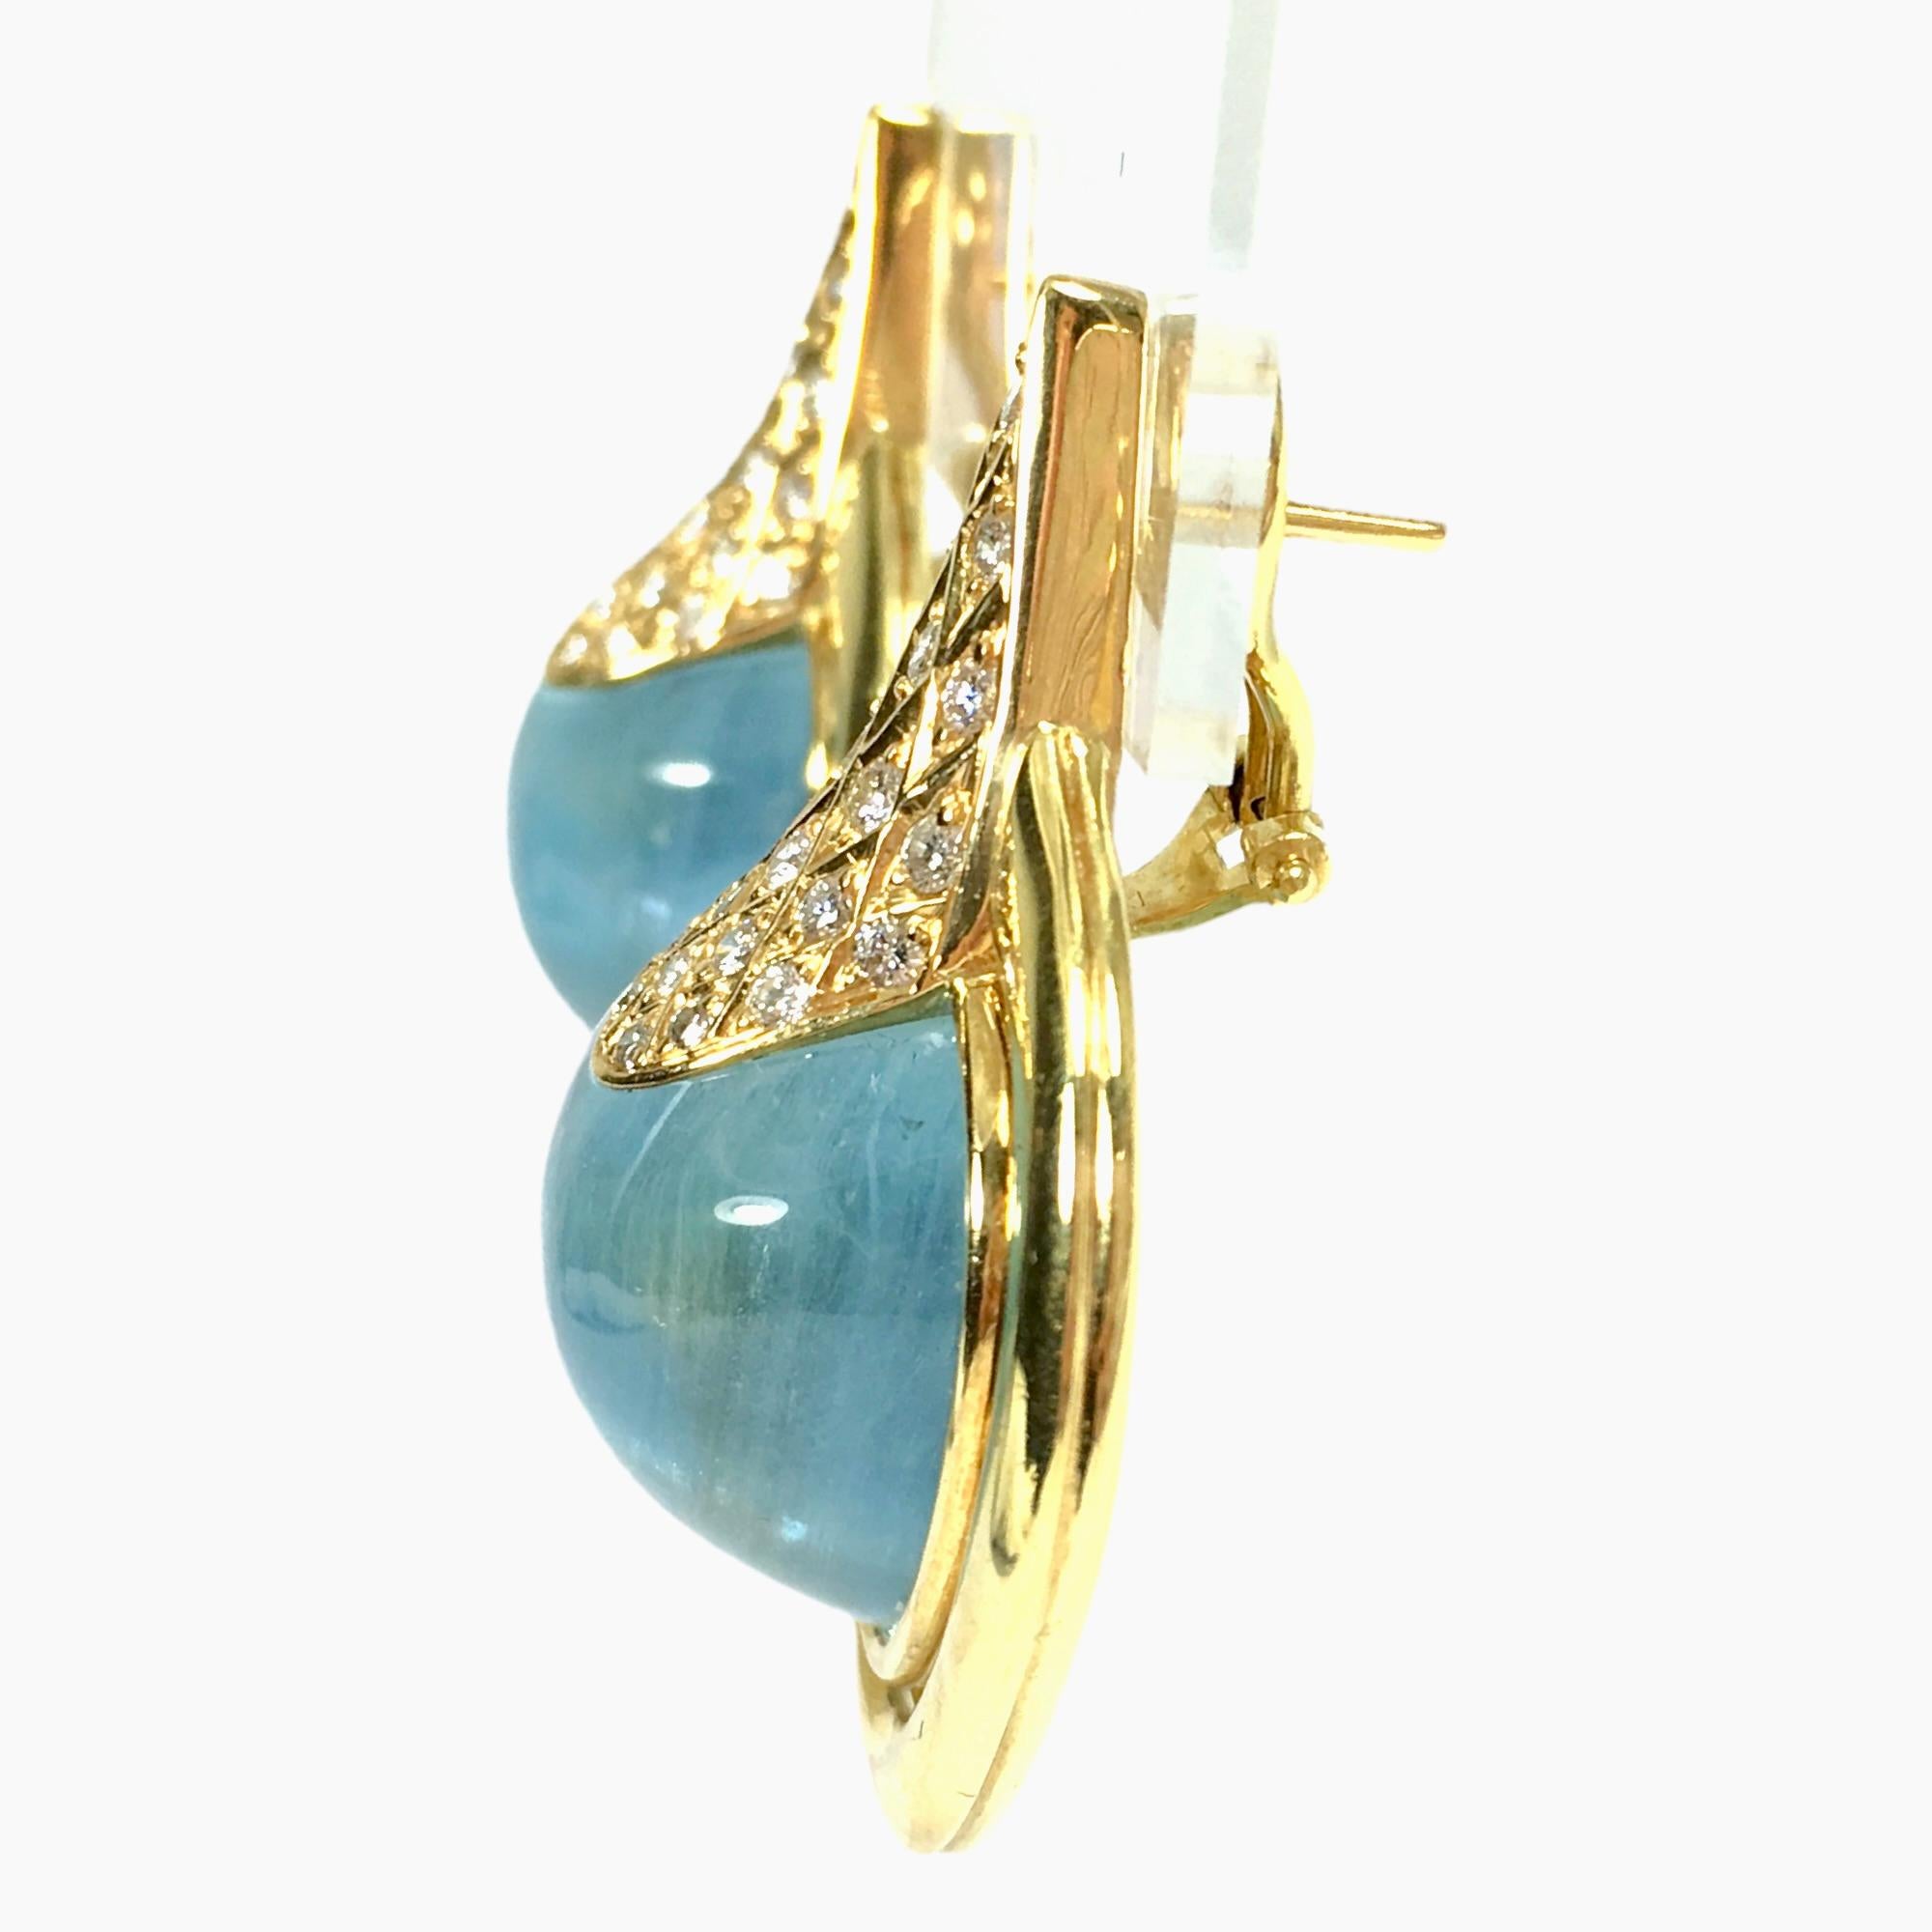 Vintage 18K yellow gold one-of-a-kind large aquamarine cabochon and diamond earrings. 
Each earring features an approximately 25ct aquamarine set yellow gold bezel, adorned by a cluster of diamonds. 
Post and omega backs for security.
48 round